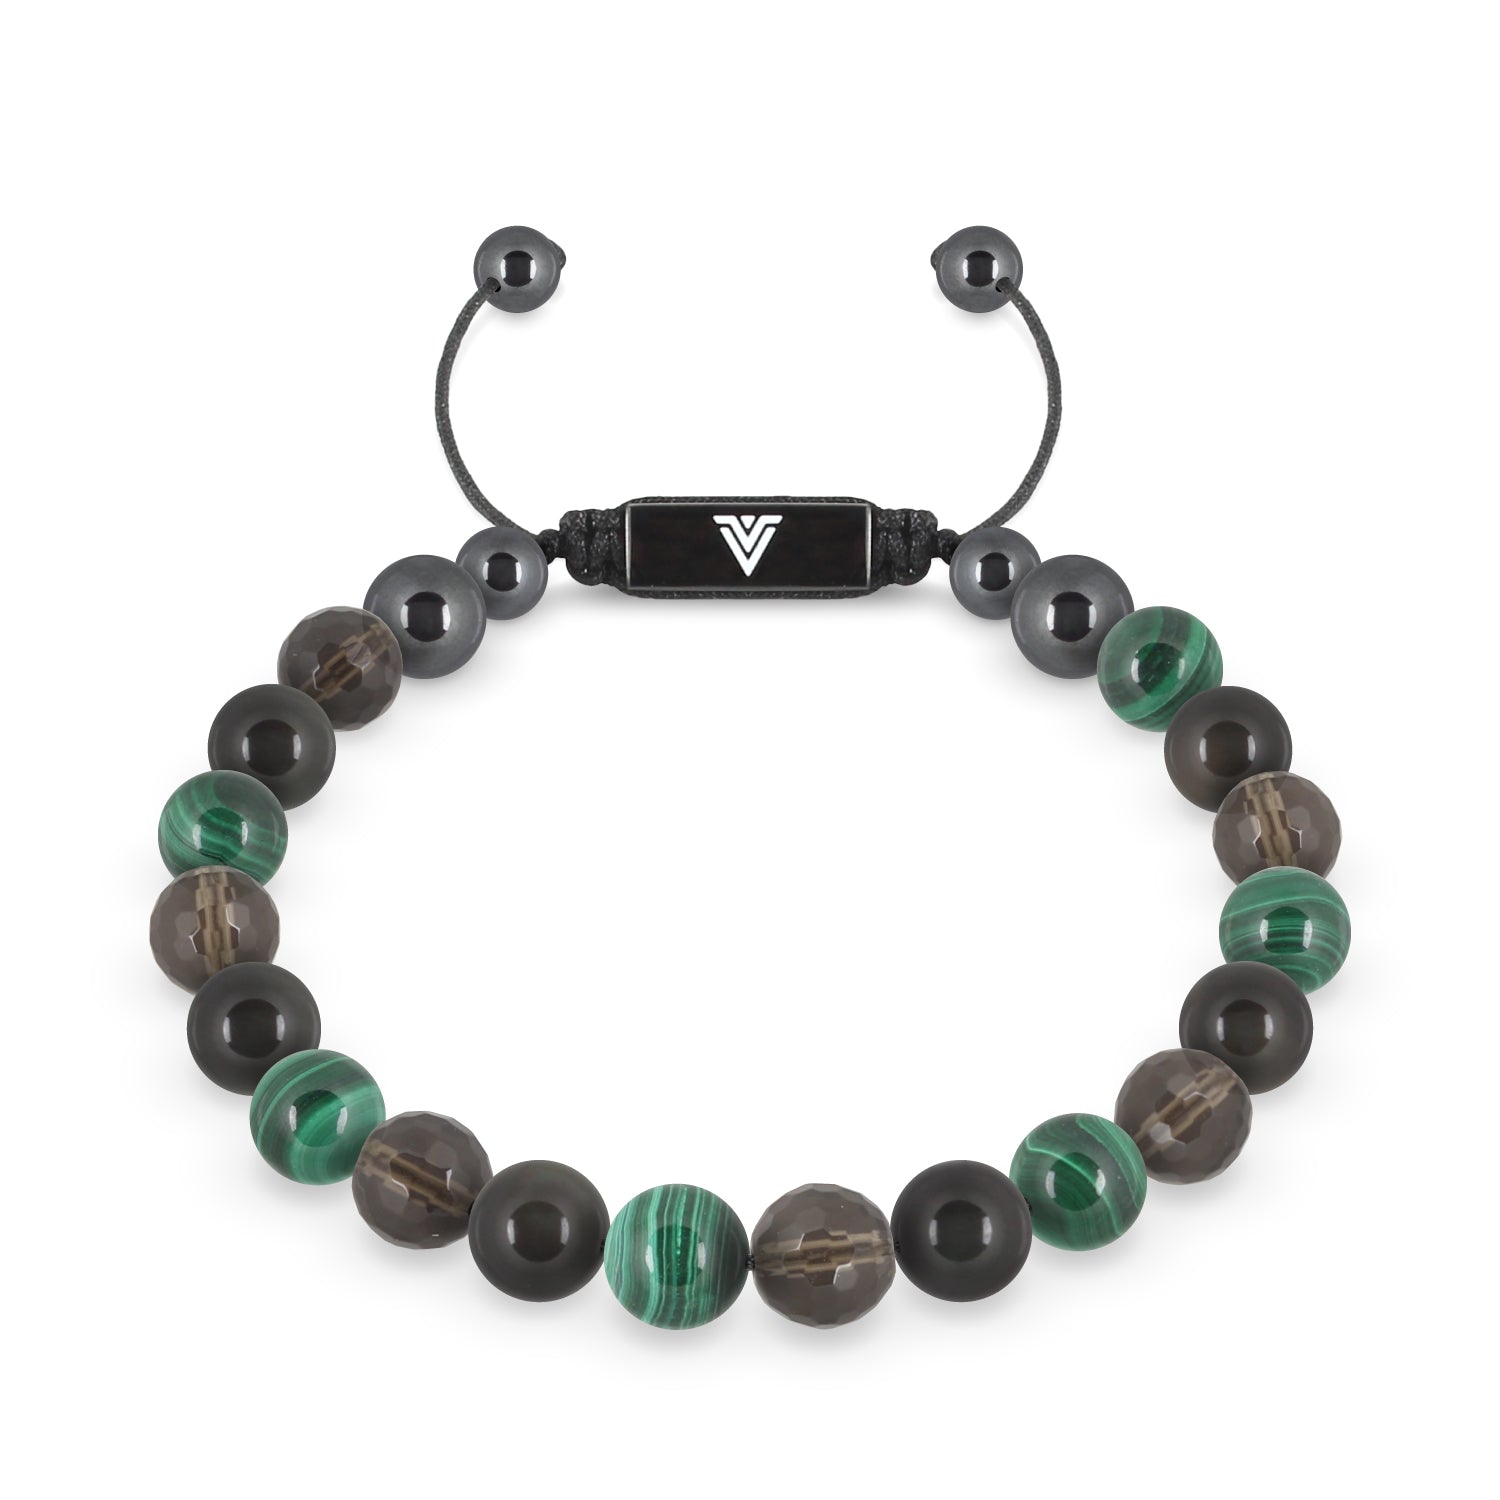 Front view of an 8mm Scorpio Zodiac crystal beaded shamballa bracelet with black stainless steel logo bead made by Voltlin